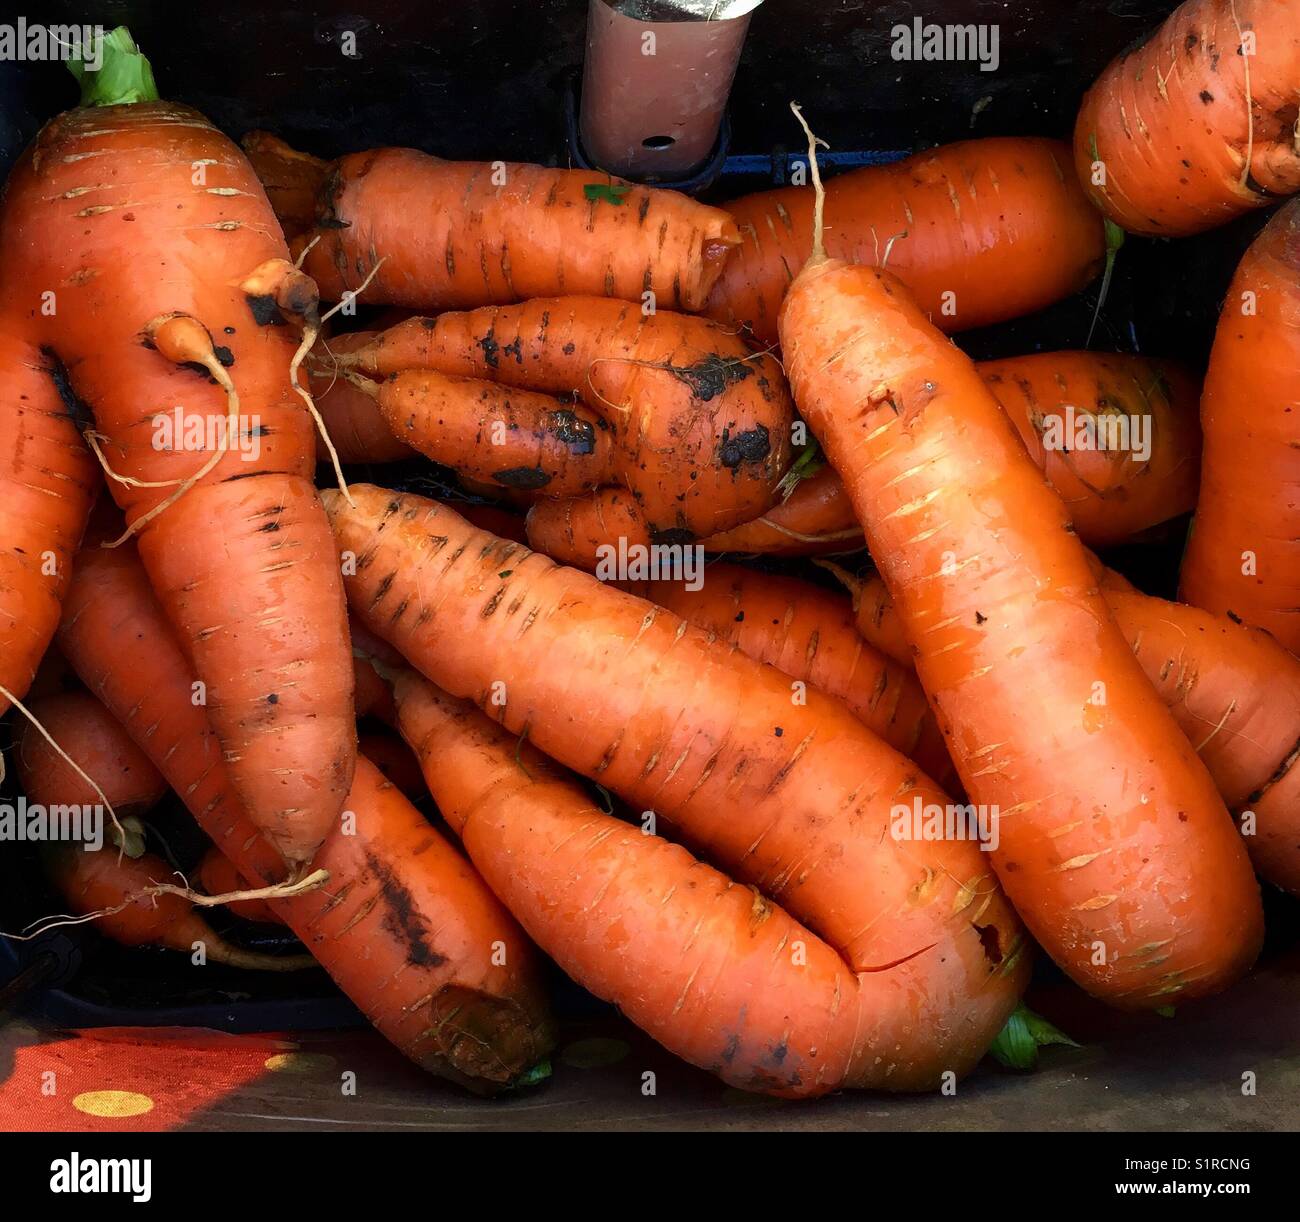 Selection of home grown carrots from allotment. Odd shaped vegetables. Stock Photo